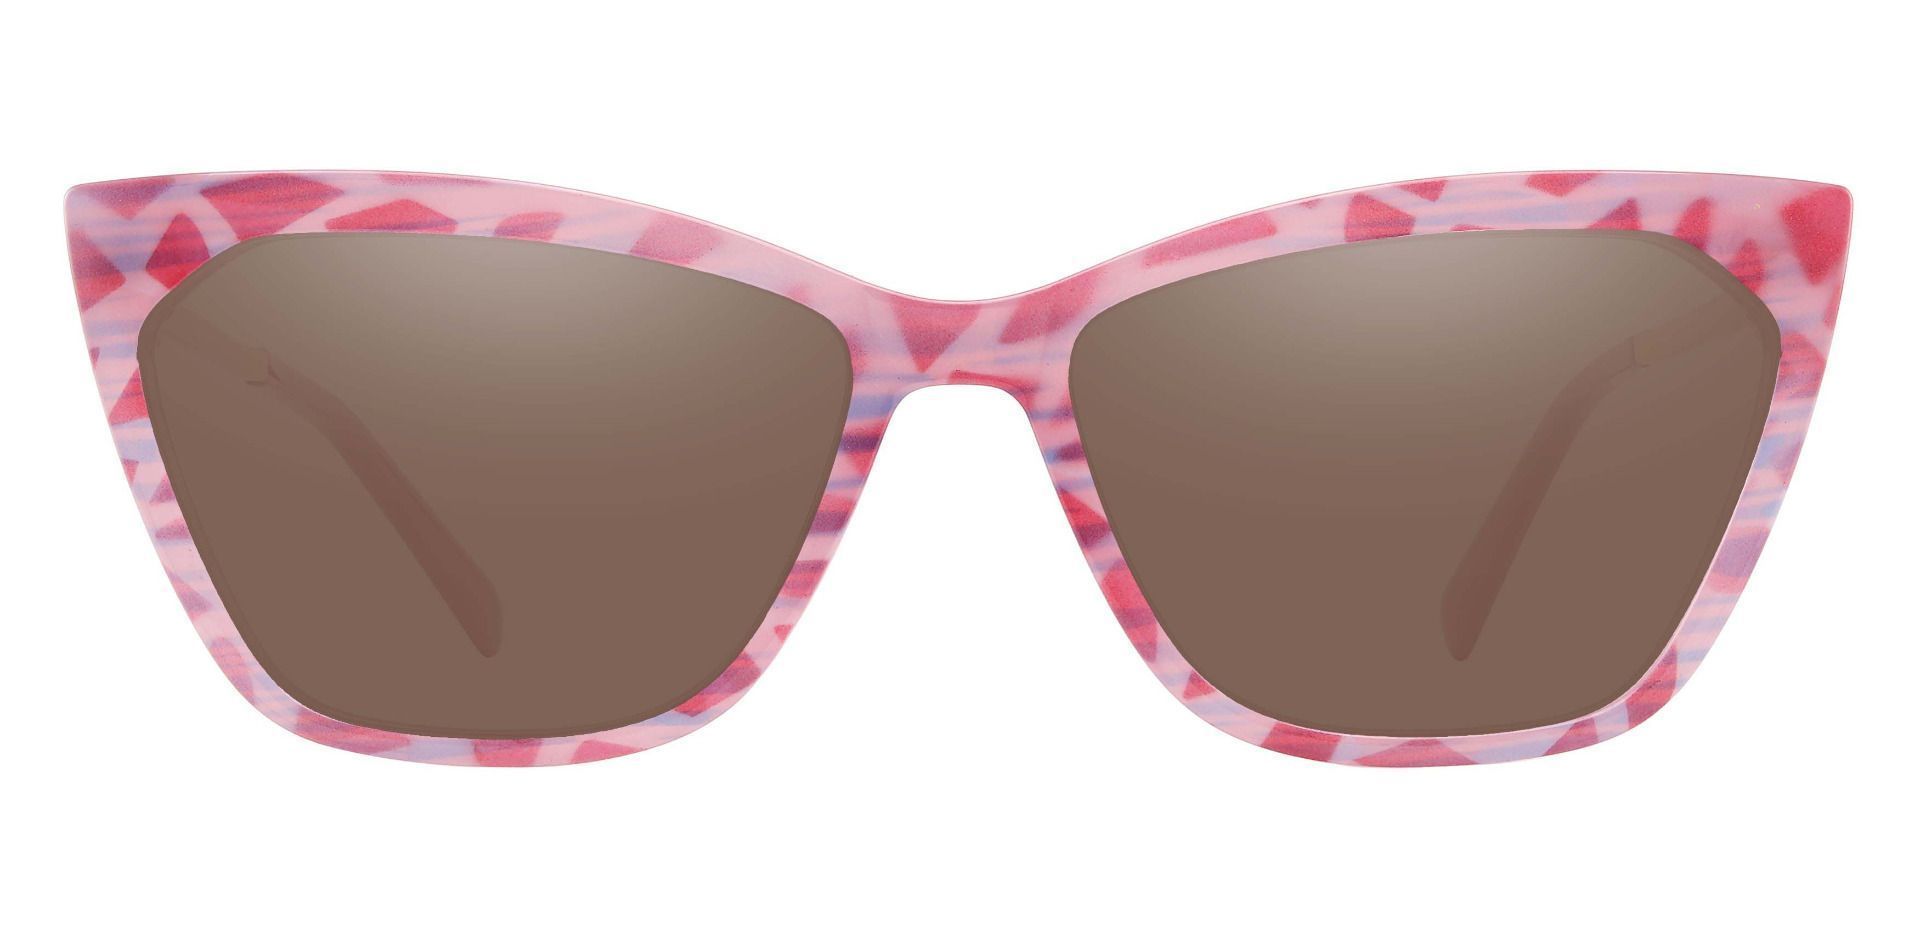 Addison Cat Eye Lined Bifocal Sunglasses - Pink Frame With Brown Lenses